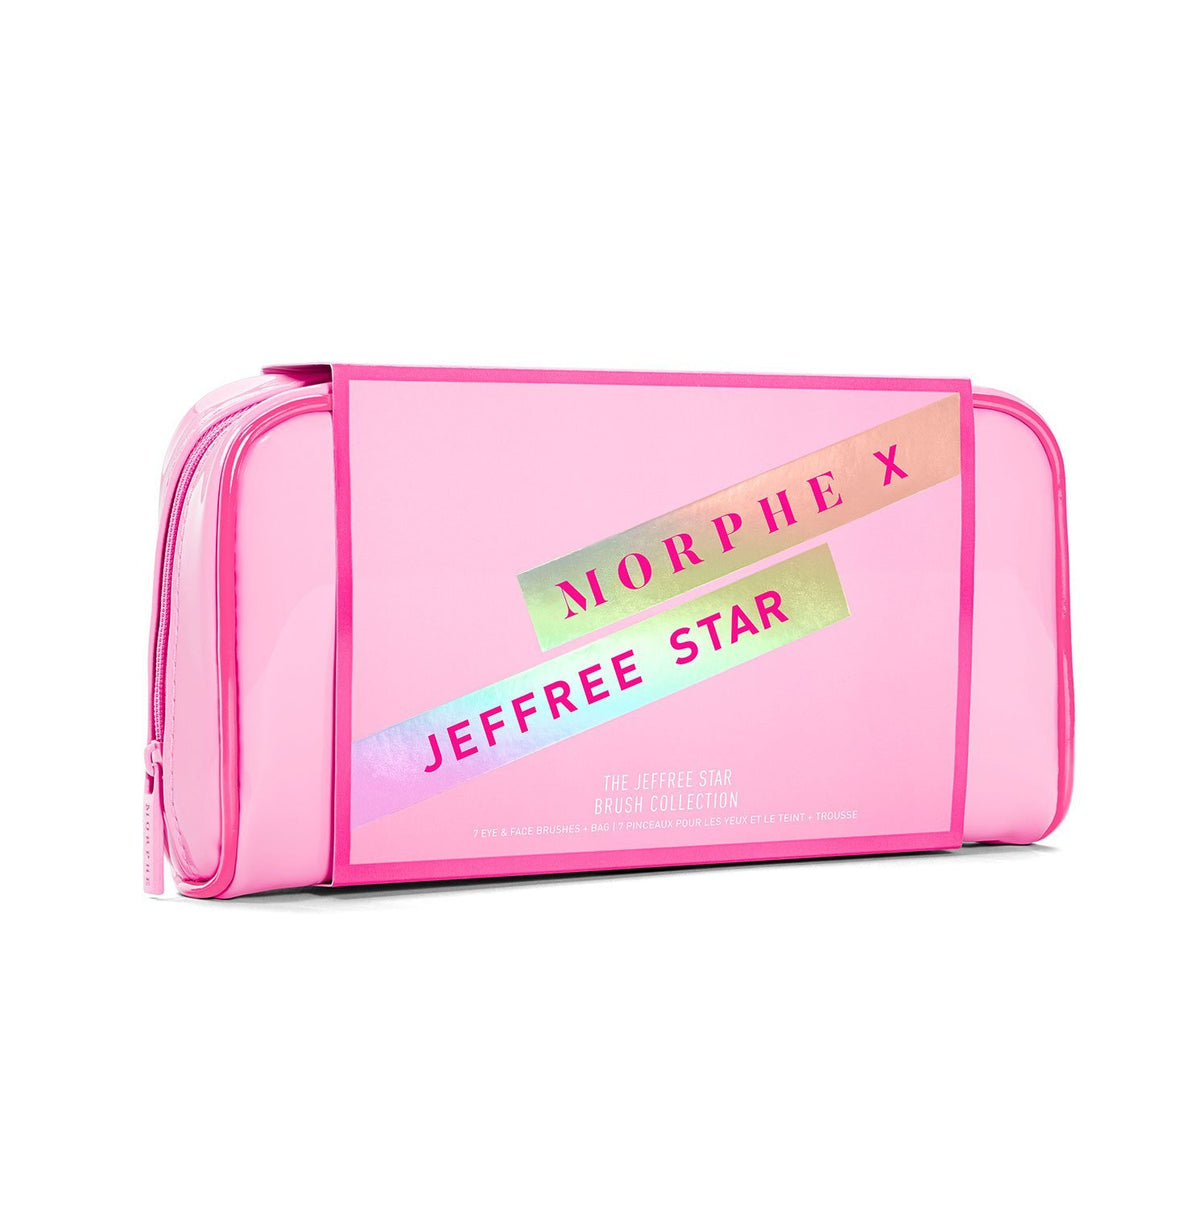 THE JEFFREE STAR EYE & FACE BRUSH COLLECTION